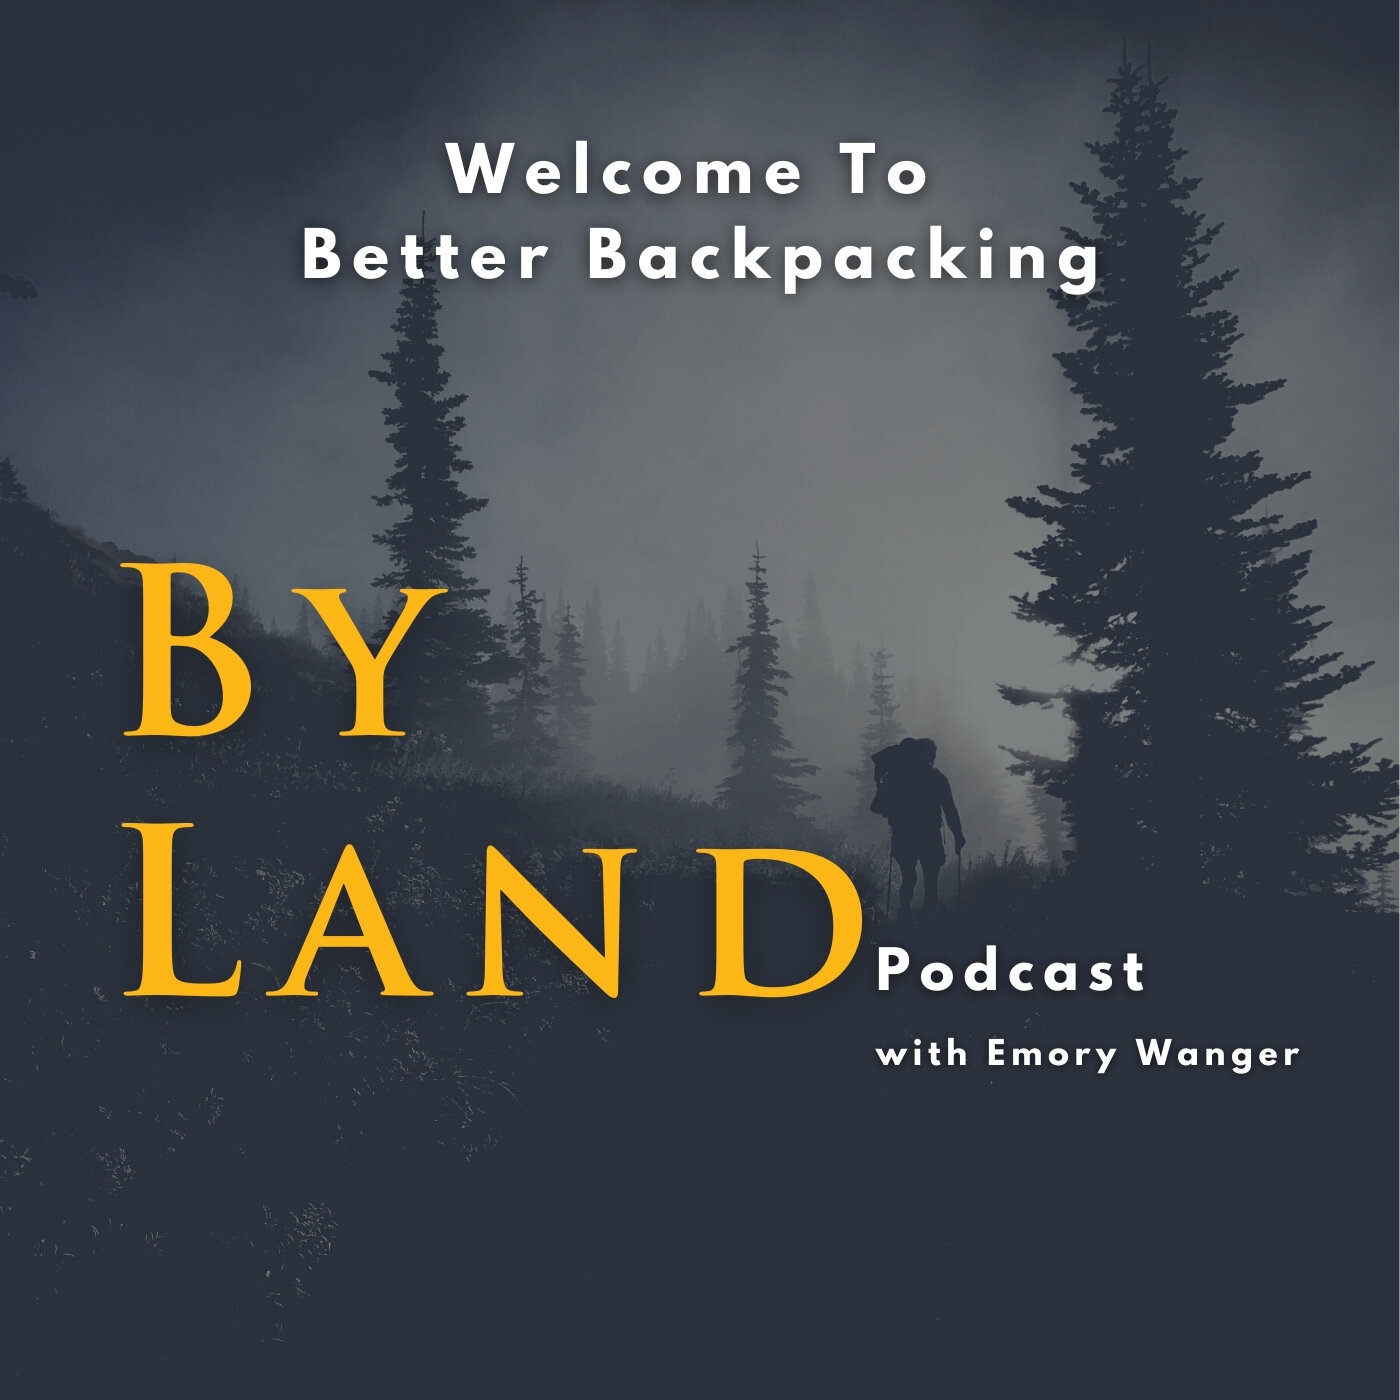 By Land Podcast